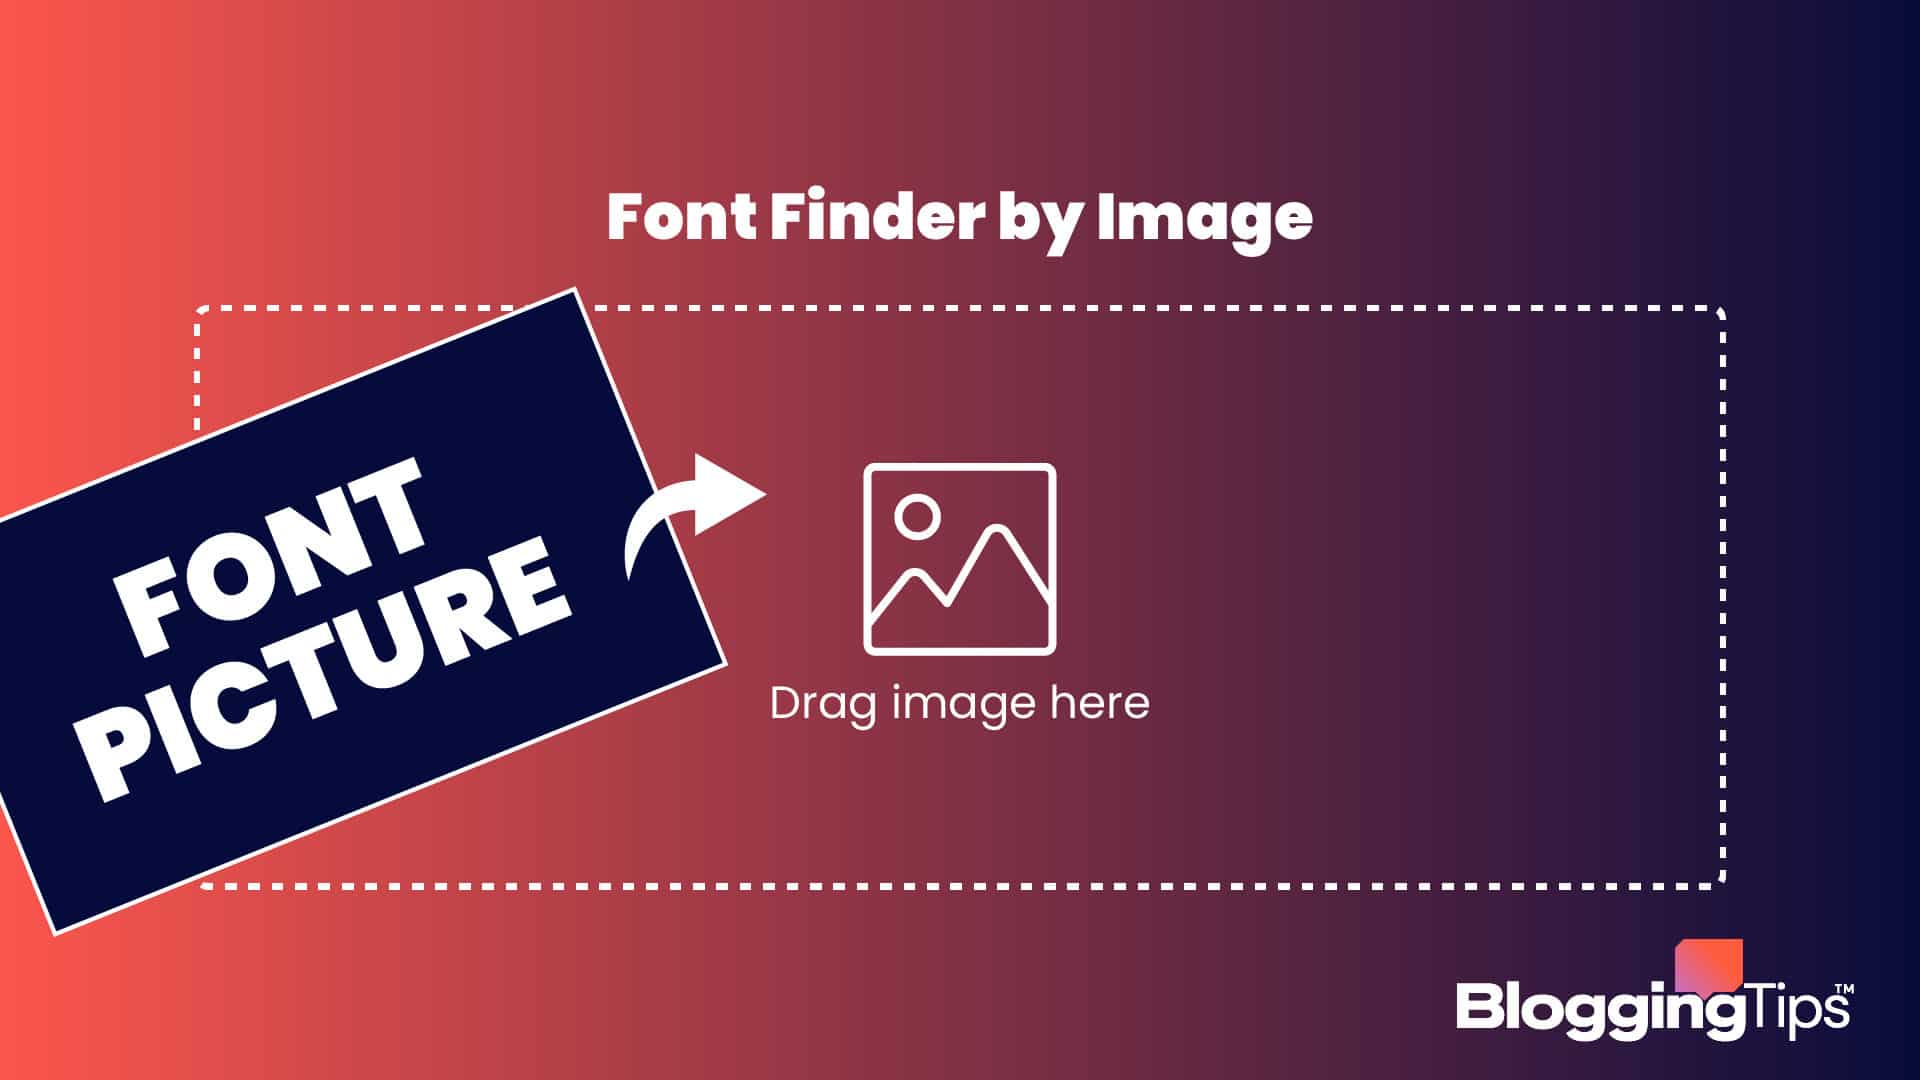 vector graphic showing an illustration of font finder by image